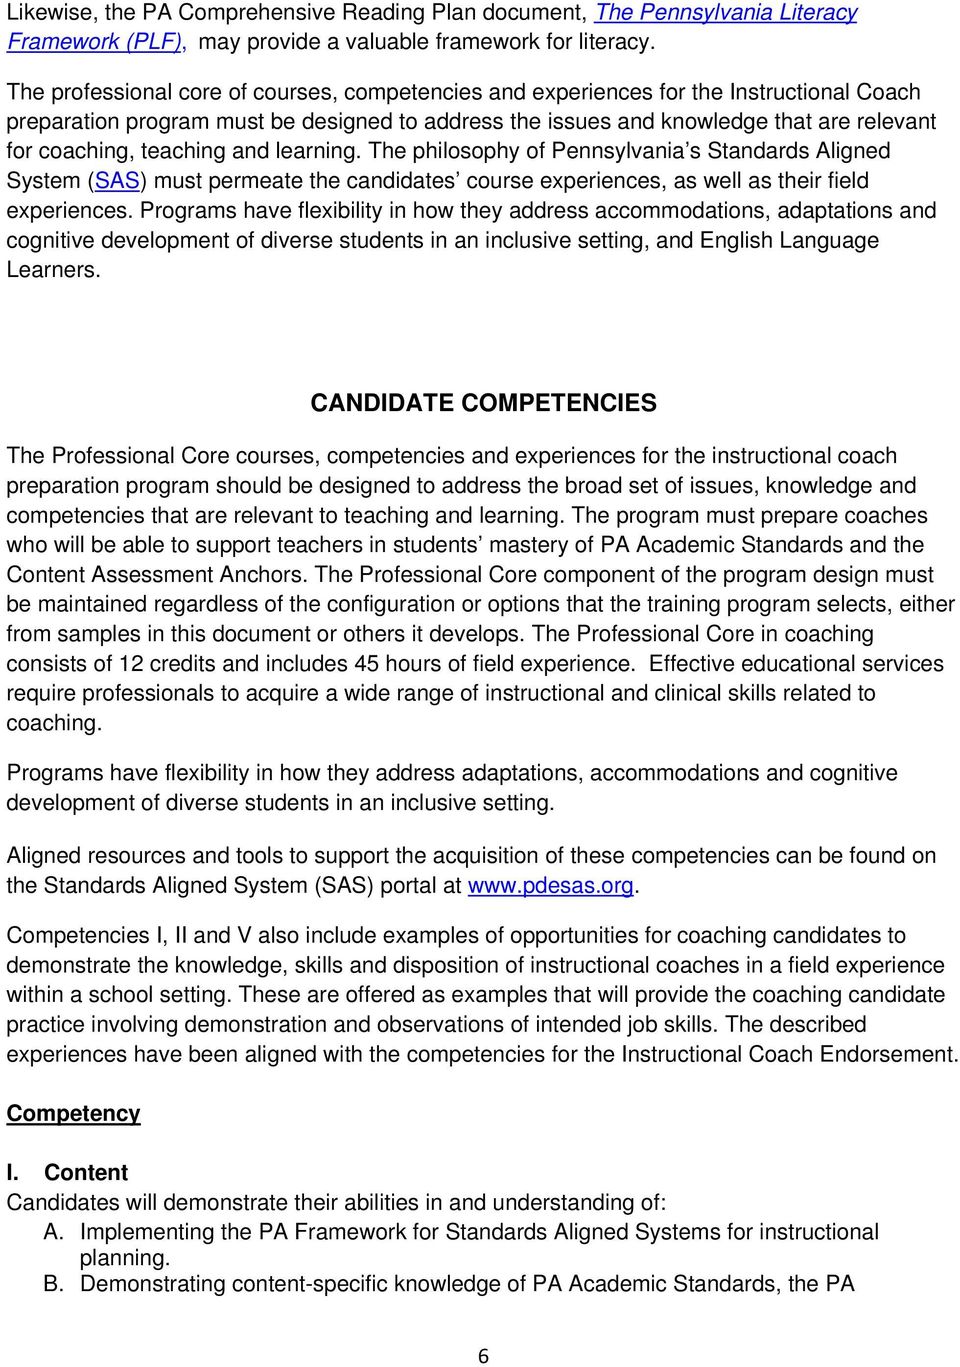 teaching and learning. The philosophy of Pennsylvania s Standards Aligned System (SAS) must permeate the candidates course experiences, as well as their field experiences.